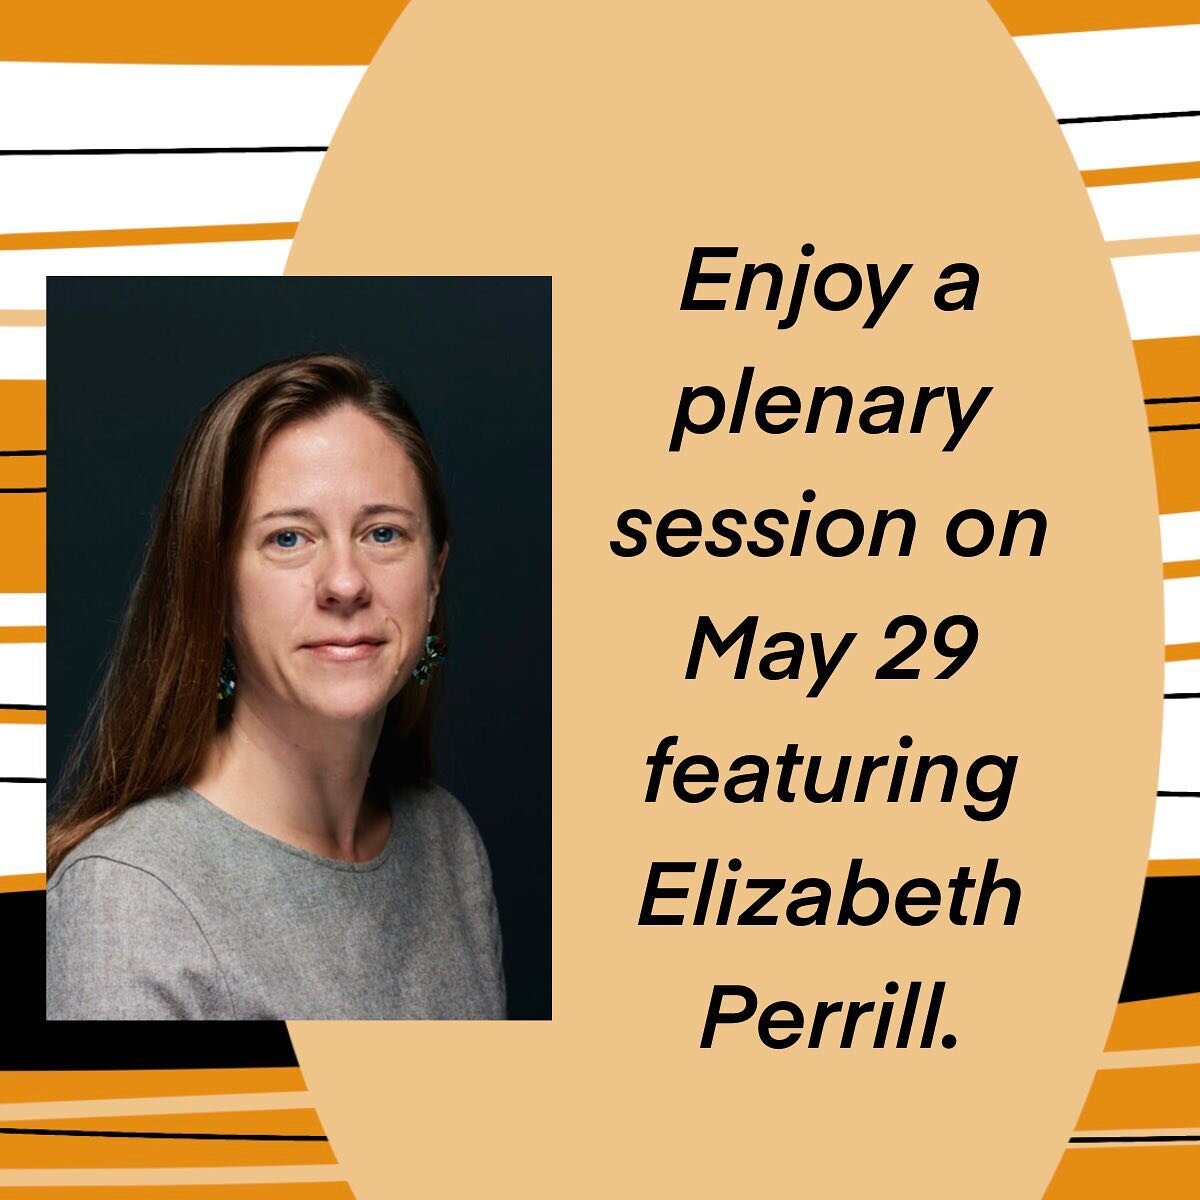 Mark your calendars &mdash; May 29th @perrillelizabeth will be featured as one of our plenary presenters!
&bull;
Visit www.woodfirenc.com link in our bio for more details concerning the schedule.
&bull;
#GetStoked #woodfiredpottery #starworksceramics